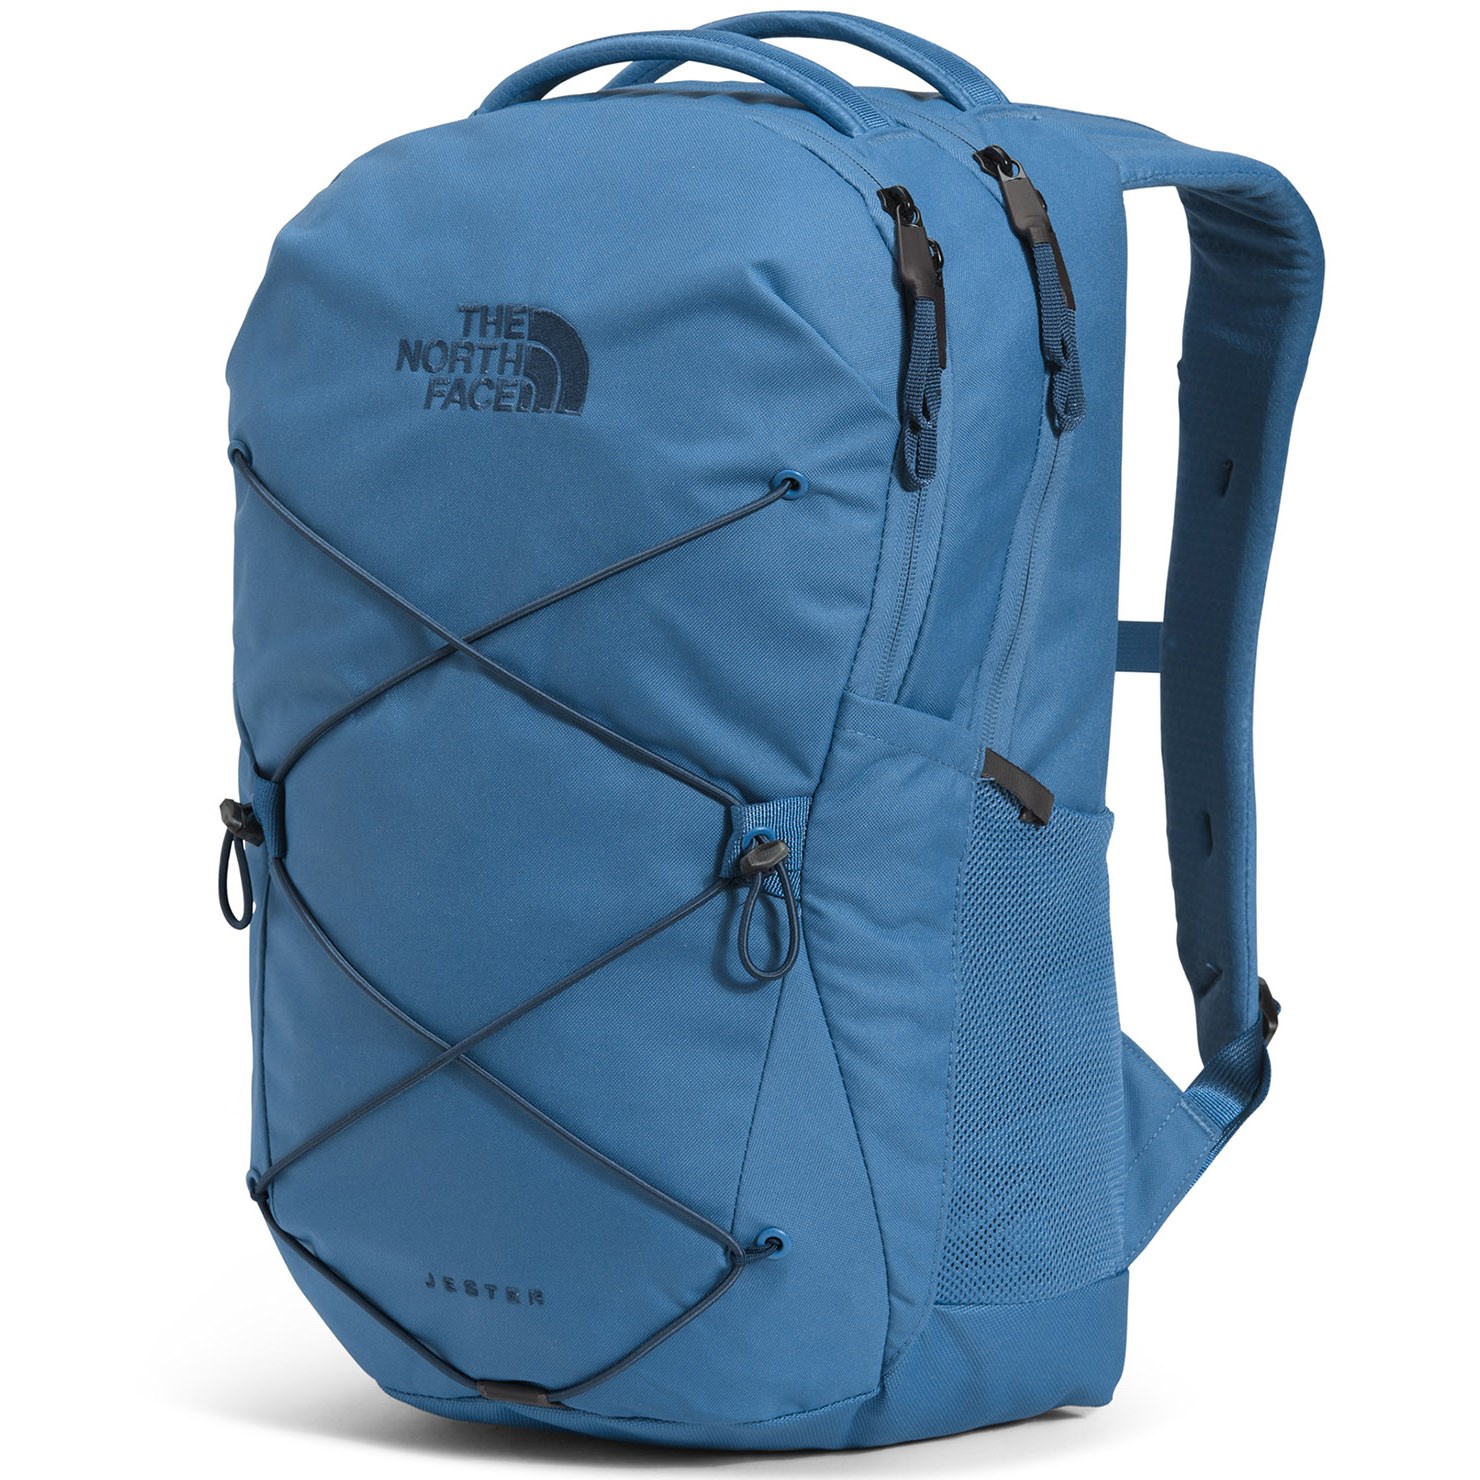 stapel Groenland markeerstift The North Face Jester Backpack | evo